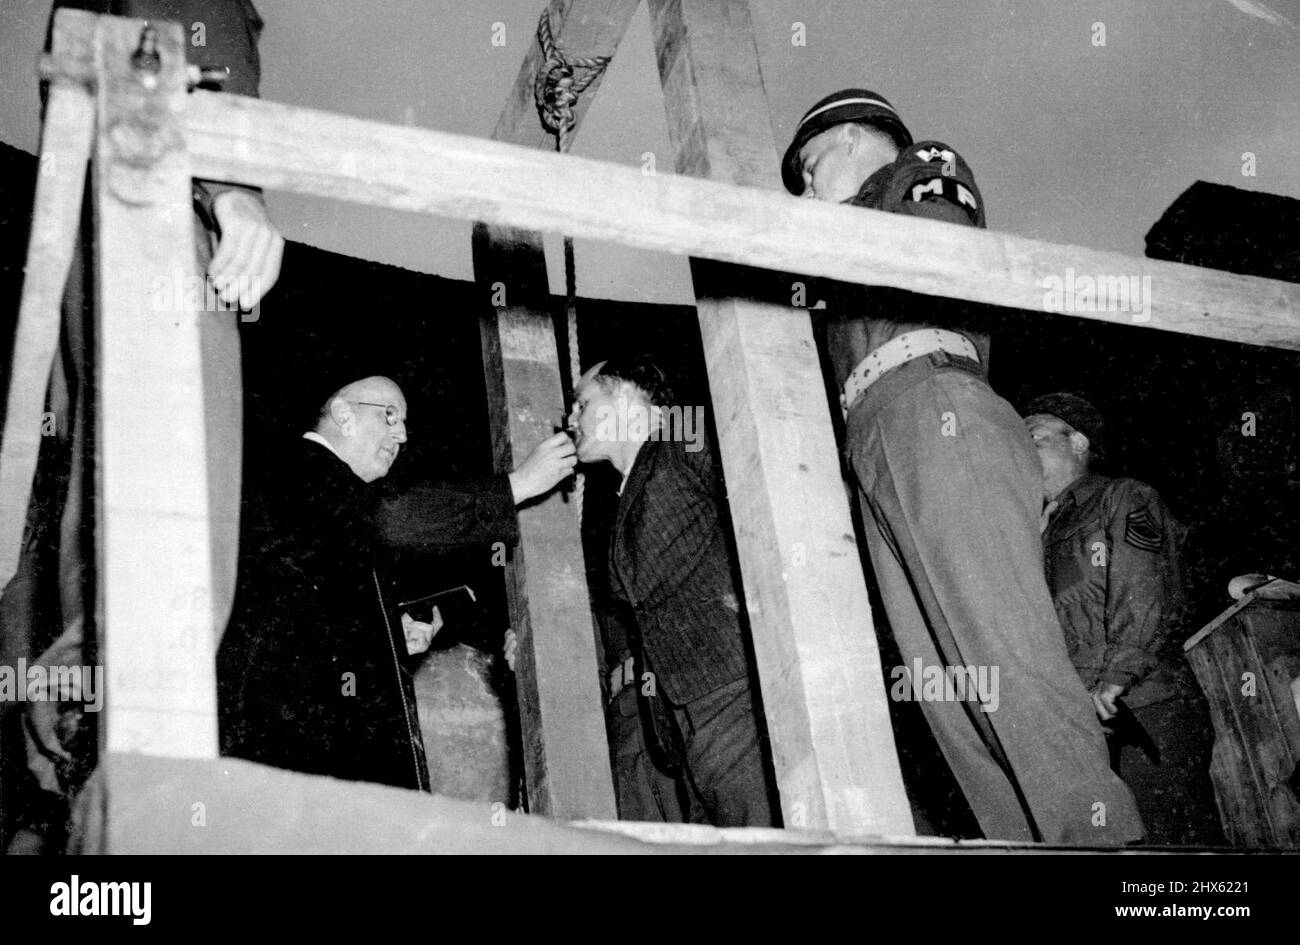 Three German Civilians Execited-First Picture -- Peter back kisses the crucifix held by a Catholic priest before the noose is placed around his neck. Three German civilians, the first was criminals to be tried in Germany, were hanged at dawn on June 29, at the Military. Prison at Rhinebach. All three were found guilty of the murder of an American airman who parachuted to earth from his blazing bomber last August 15. The three men, Peter back, a cripple and rural leader of the Nazi Party; Peter Stock Photo